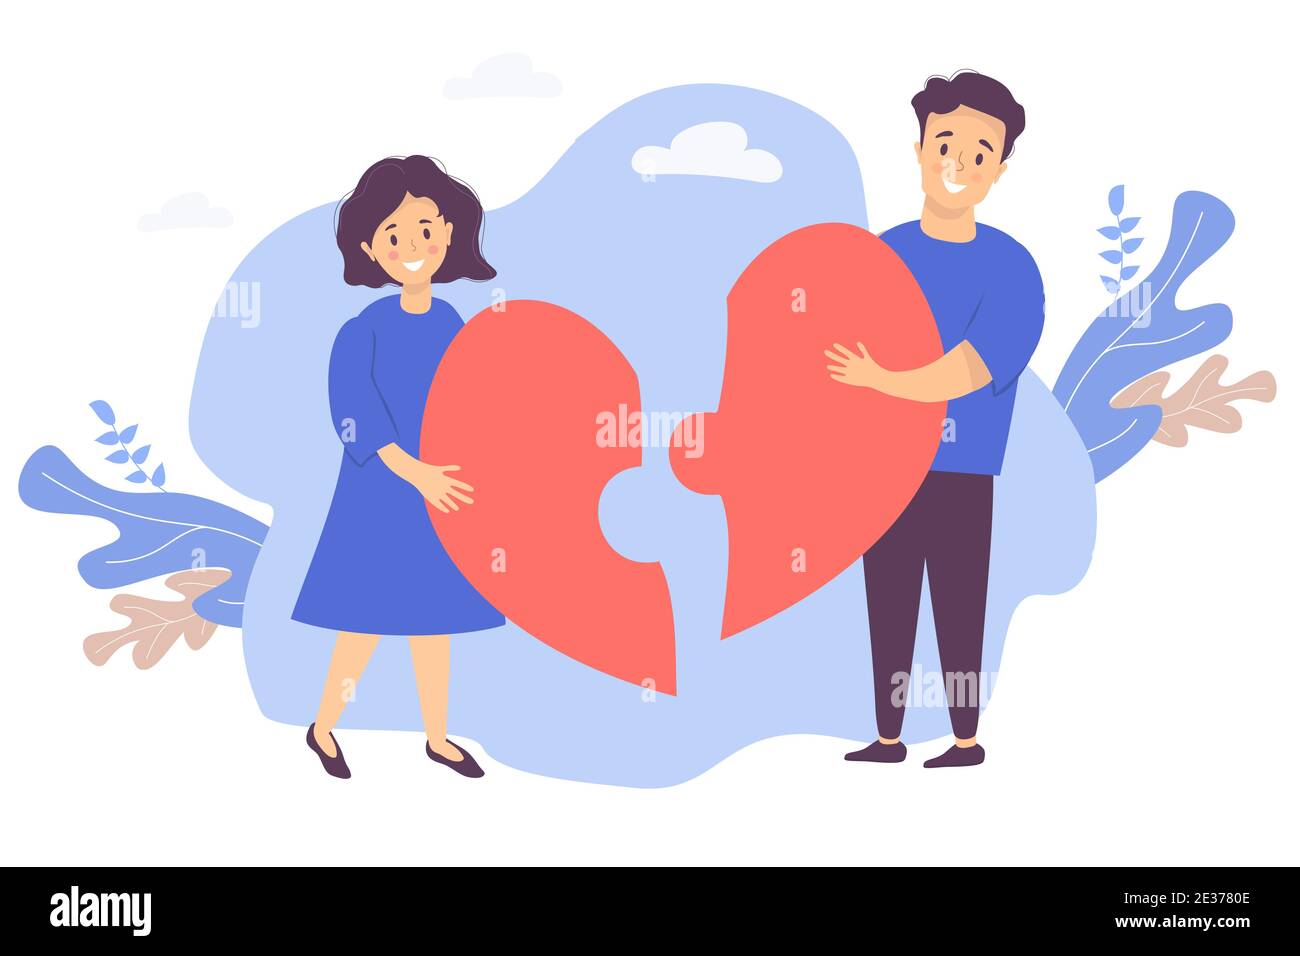 Couple puts together a puzzle of halves of the heart. A man and a woman reunite by joining two pieces into one big red heart. Vector illustration. The Stock Vector